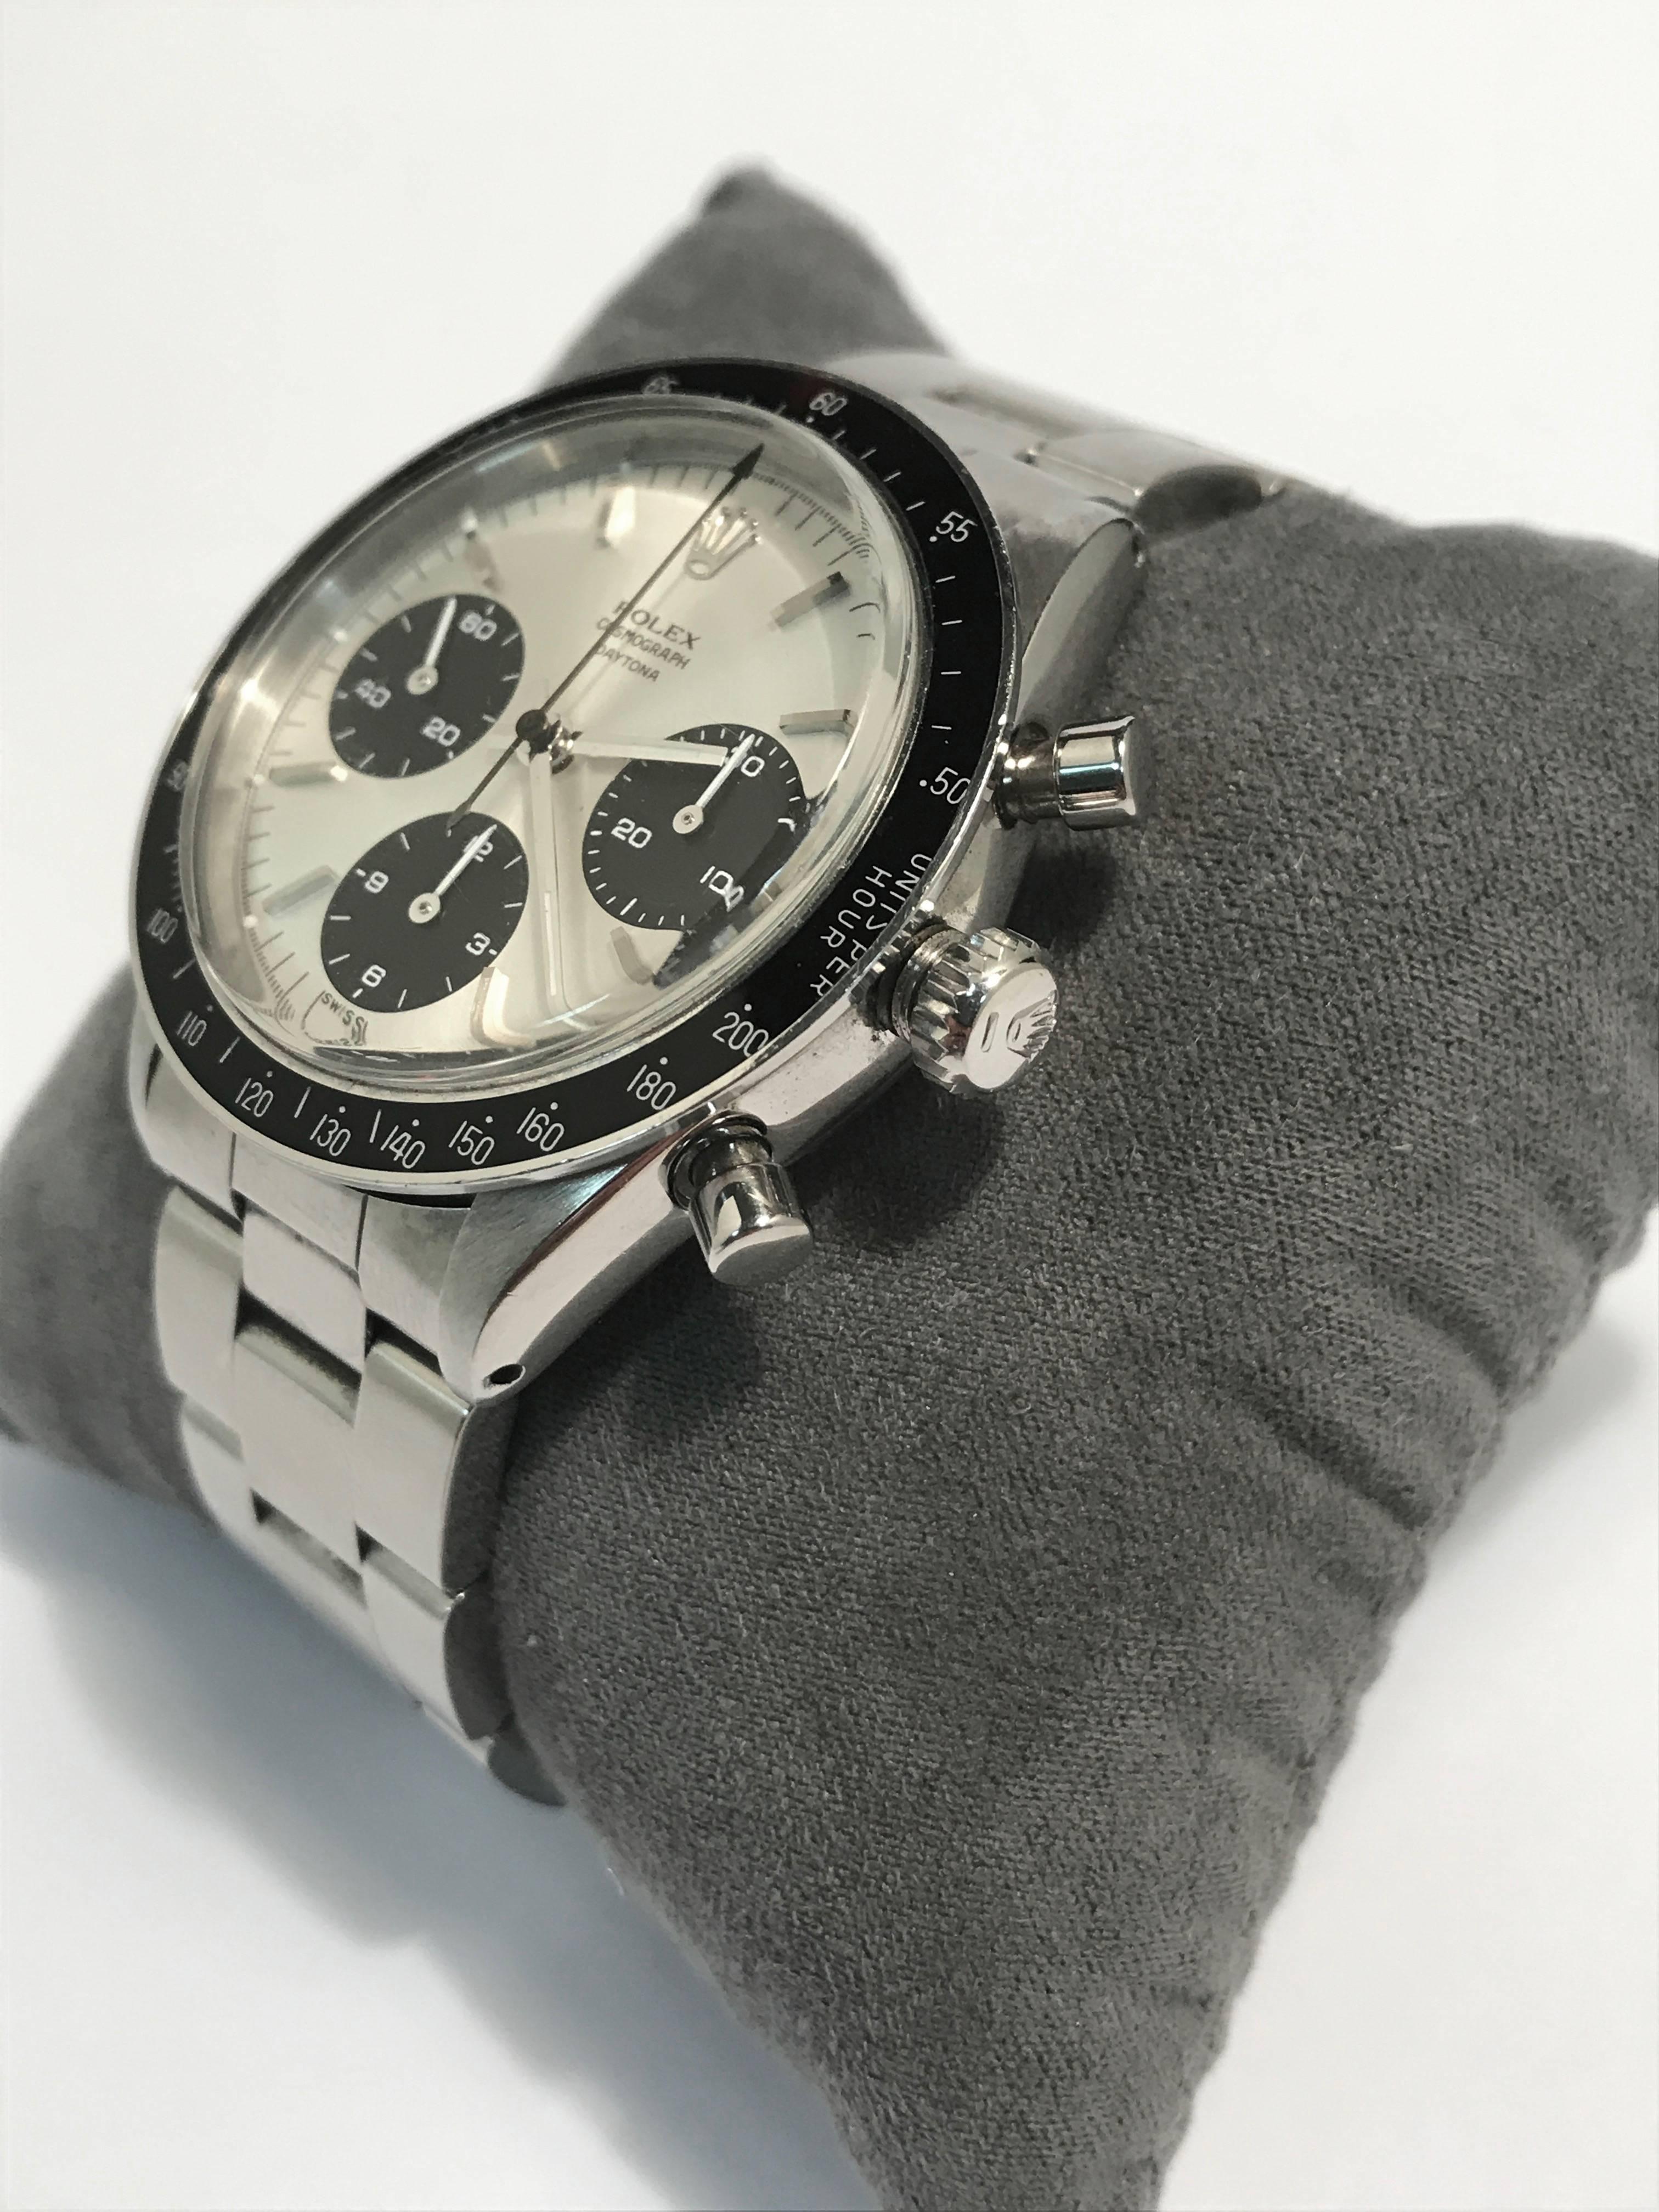 Rare Rolex Daytona Circa 1967.
Movement Transition 722-1 and NON 22 Valjoux
Dial Without Tritium

Individual Number : 15...01